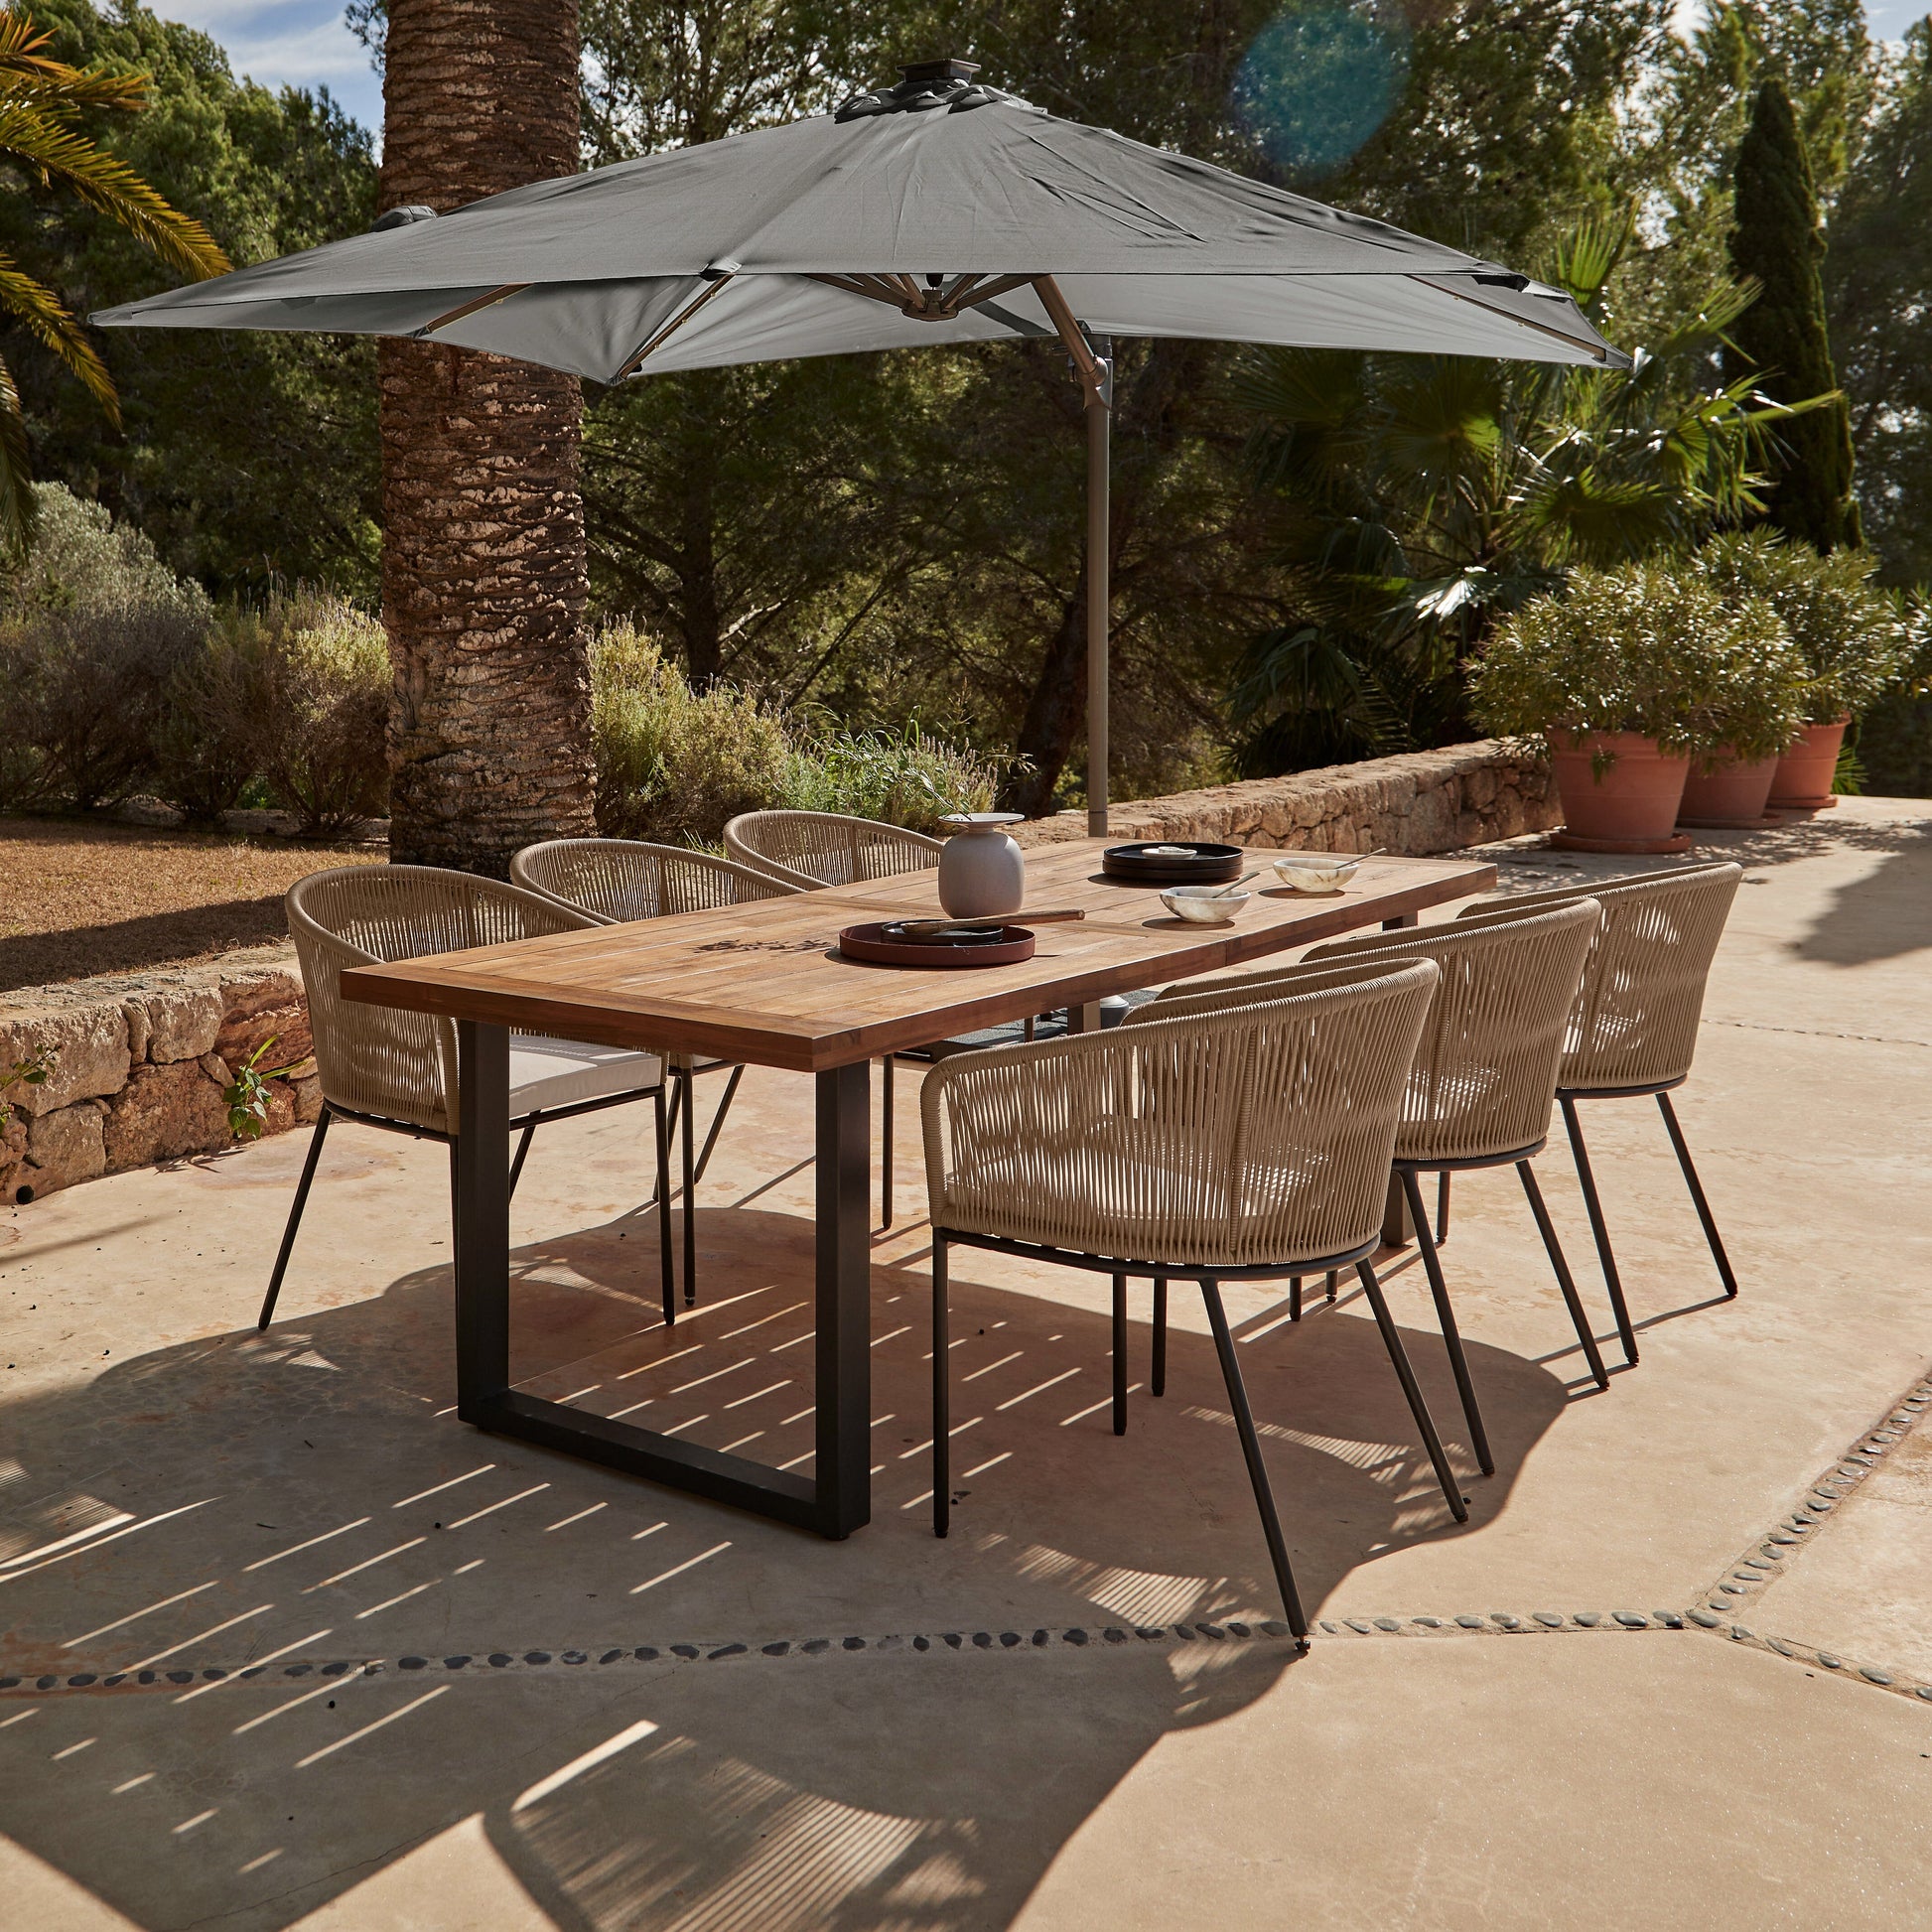 Hali 6 Seater Wooden Outdoor Dining Set with Hali Natural Chairs & Grey Premium Cantilever Parasol - 235cm